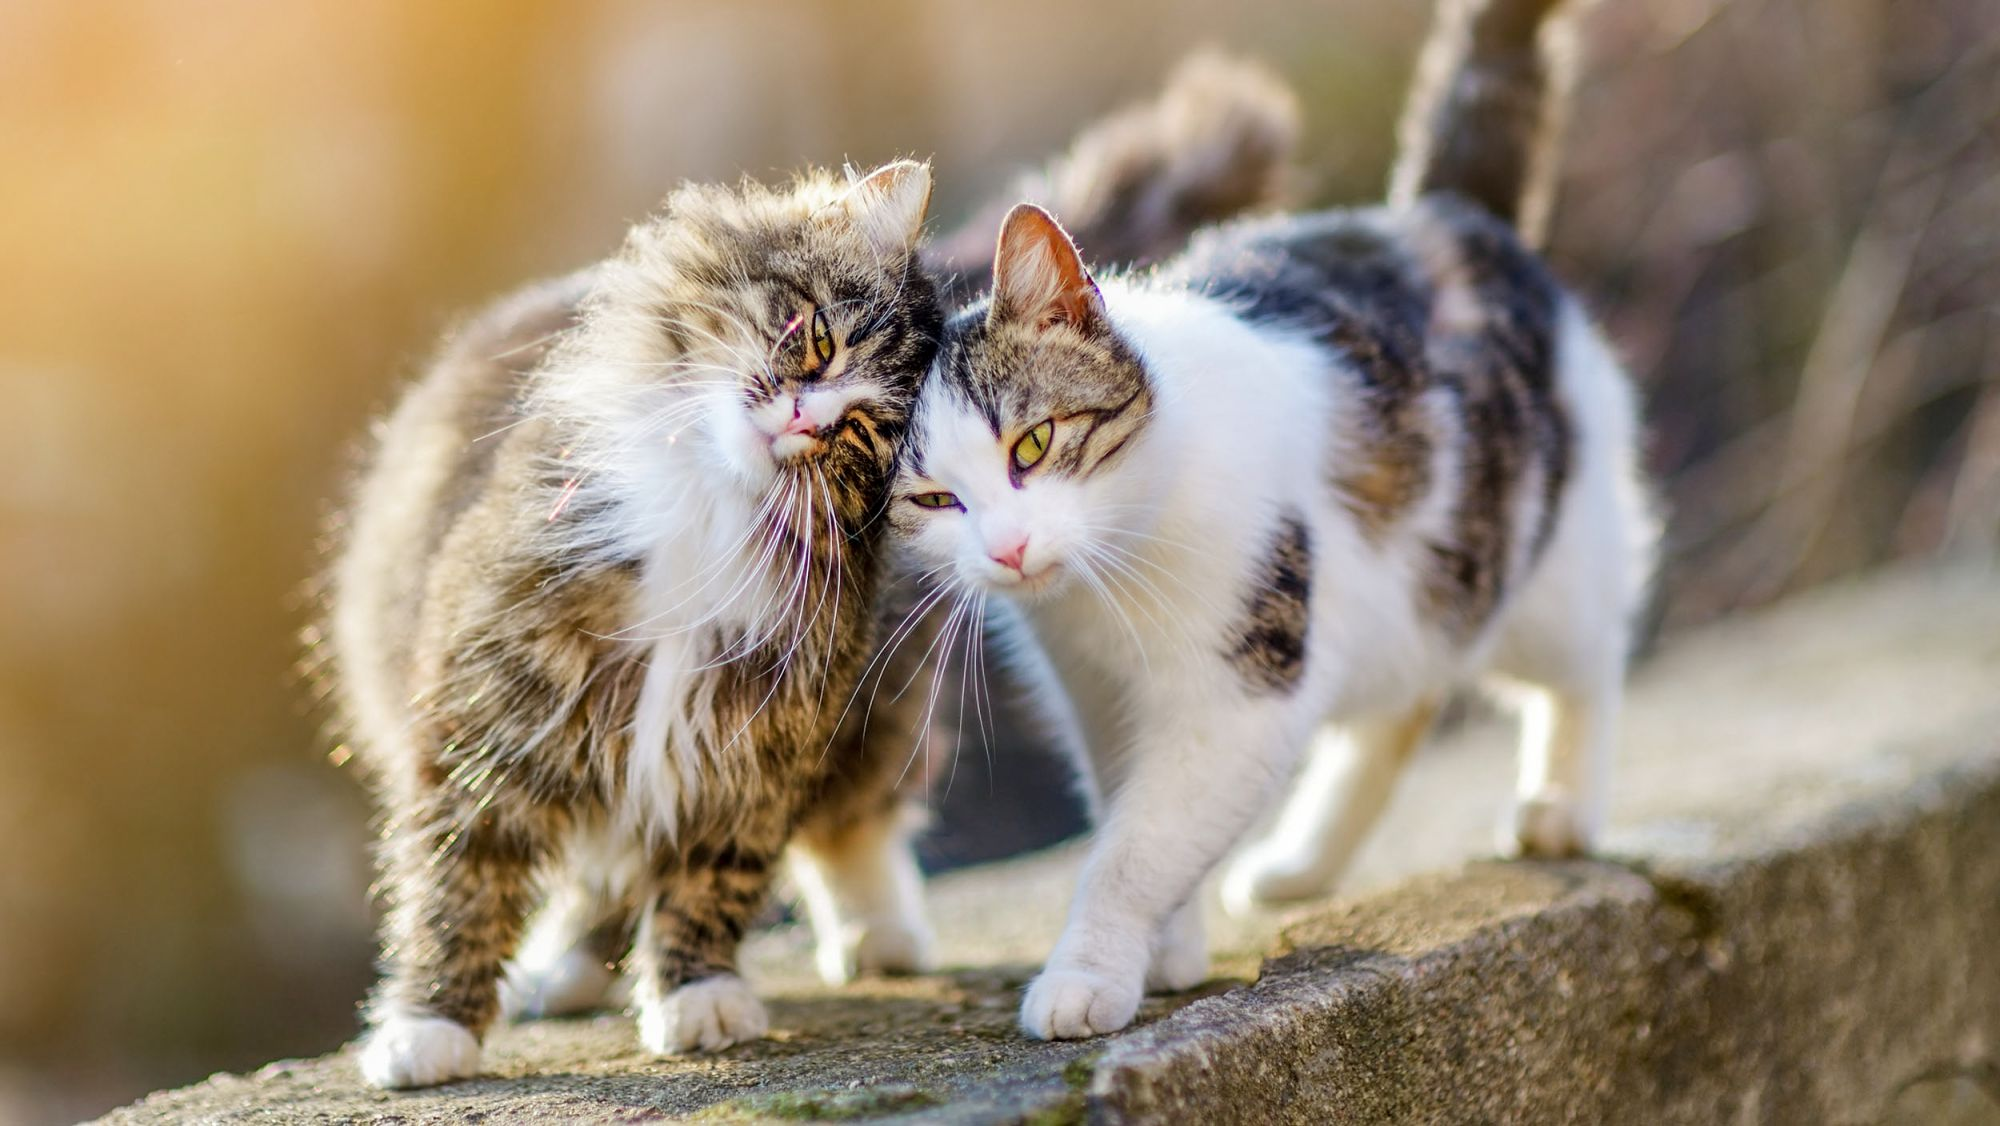 Two kittens standing on a wall outdoors